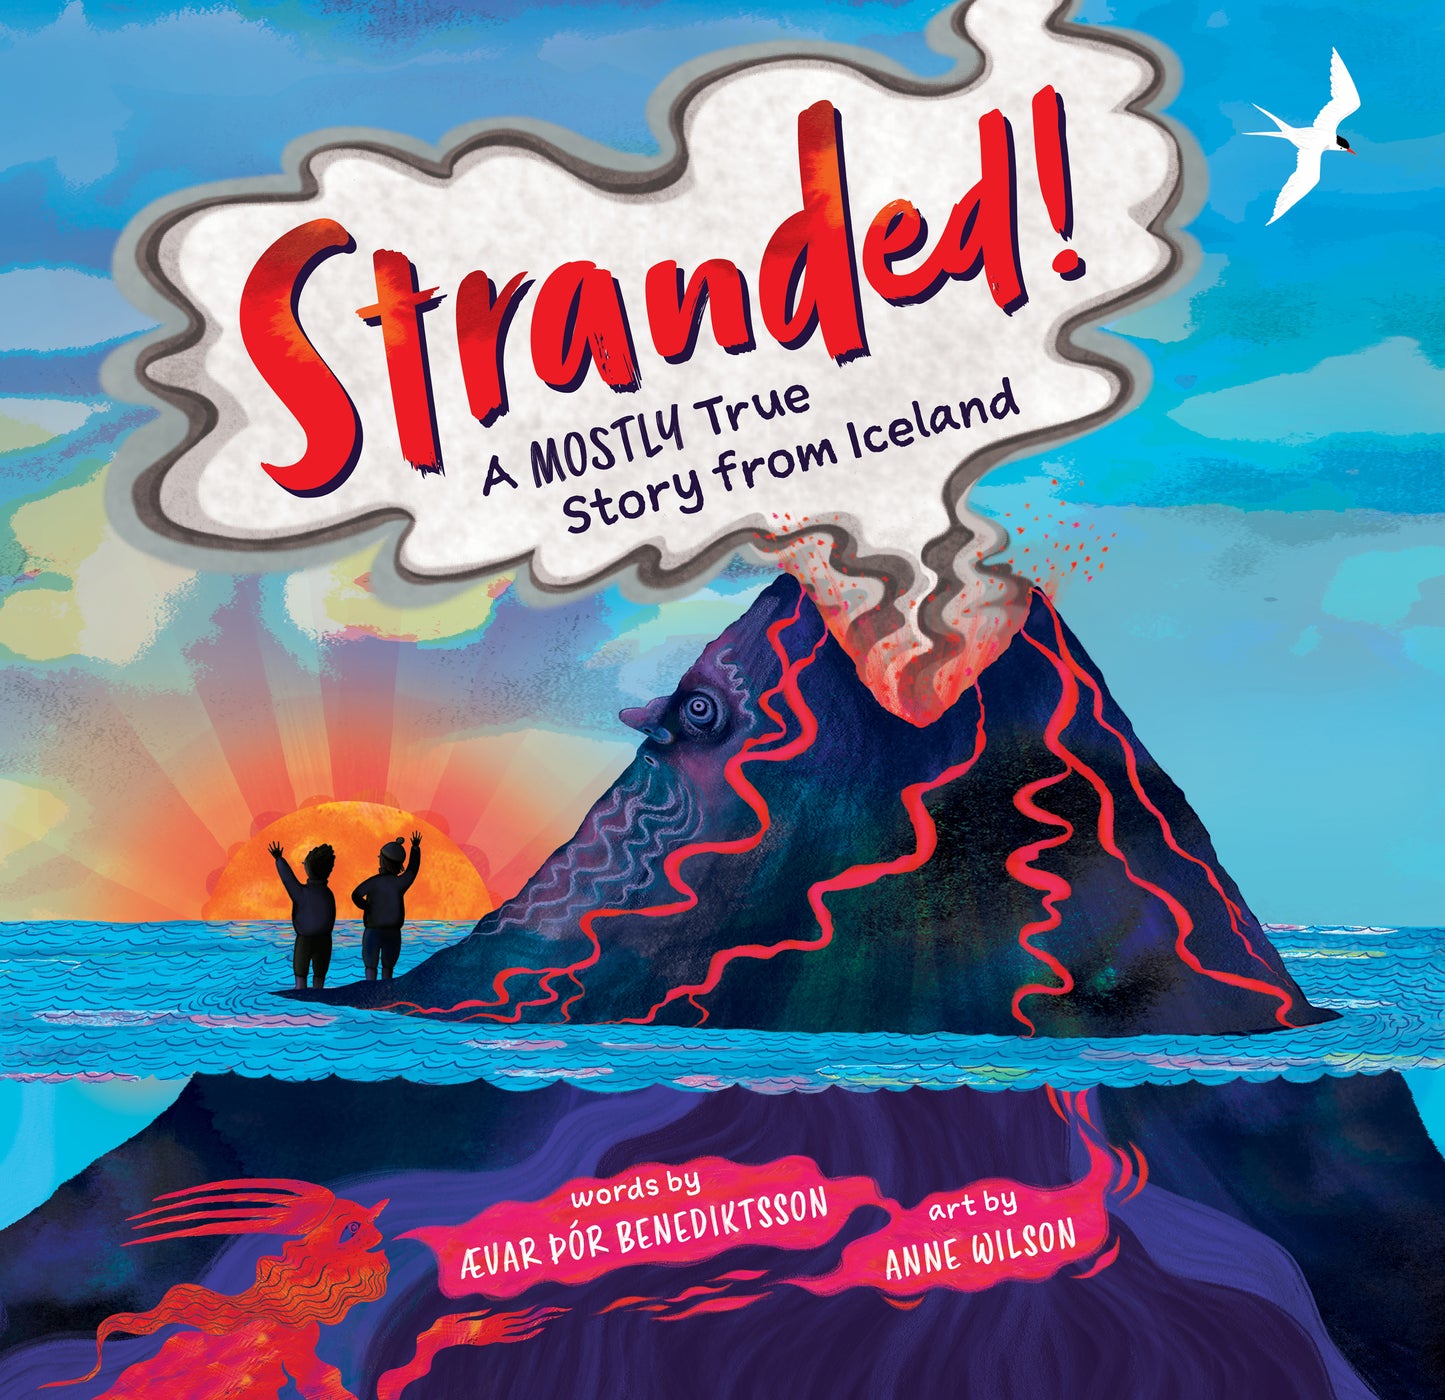 Stranded! A Mostly True Story From Iceland